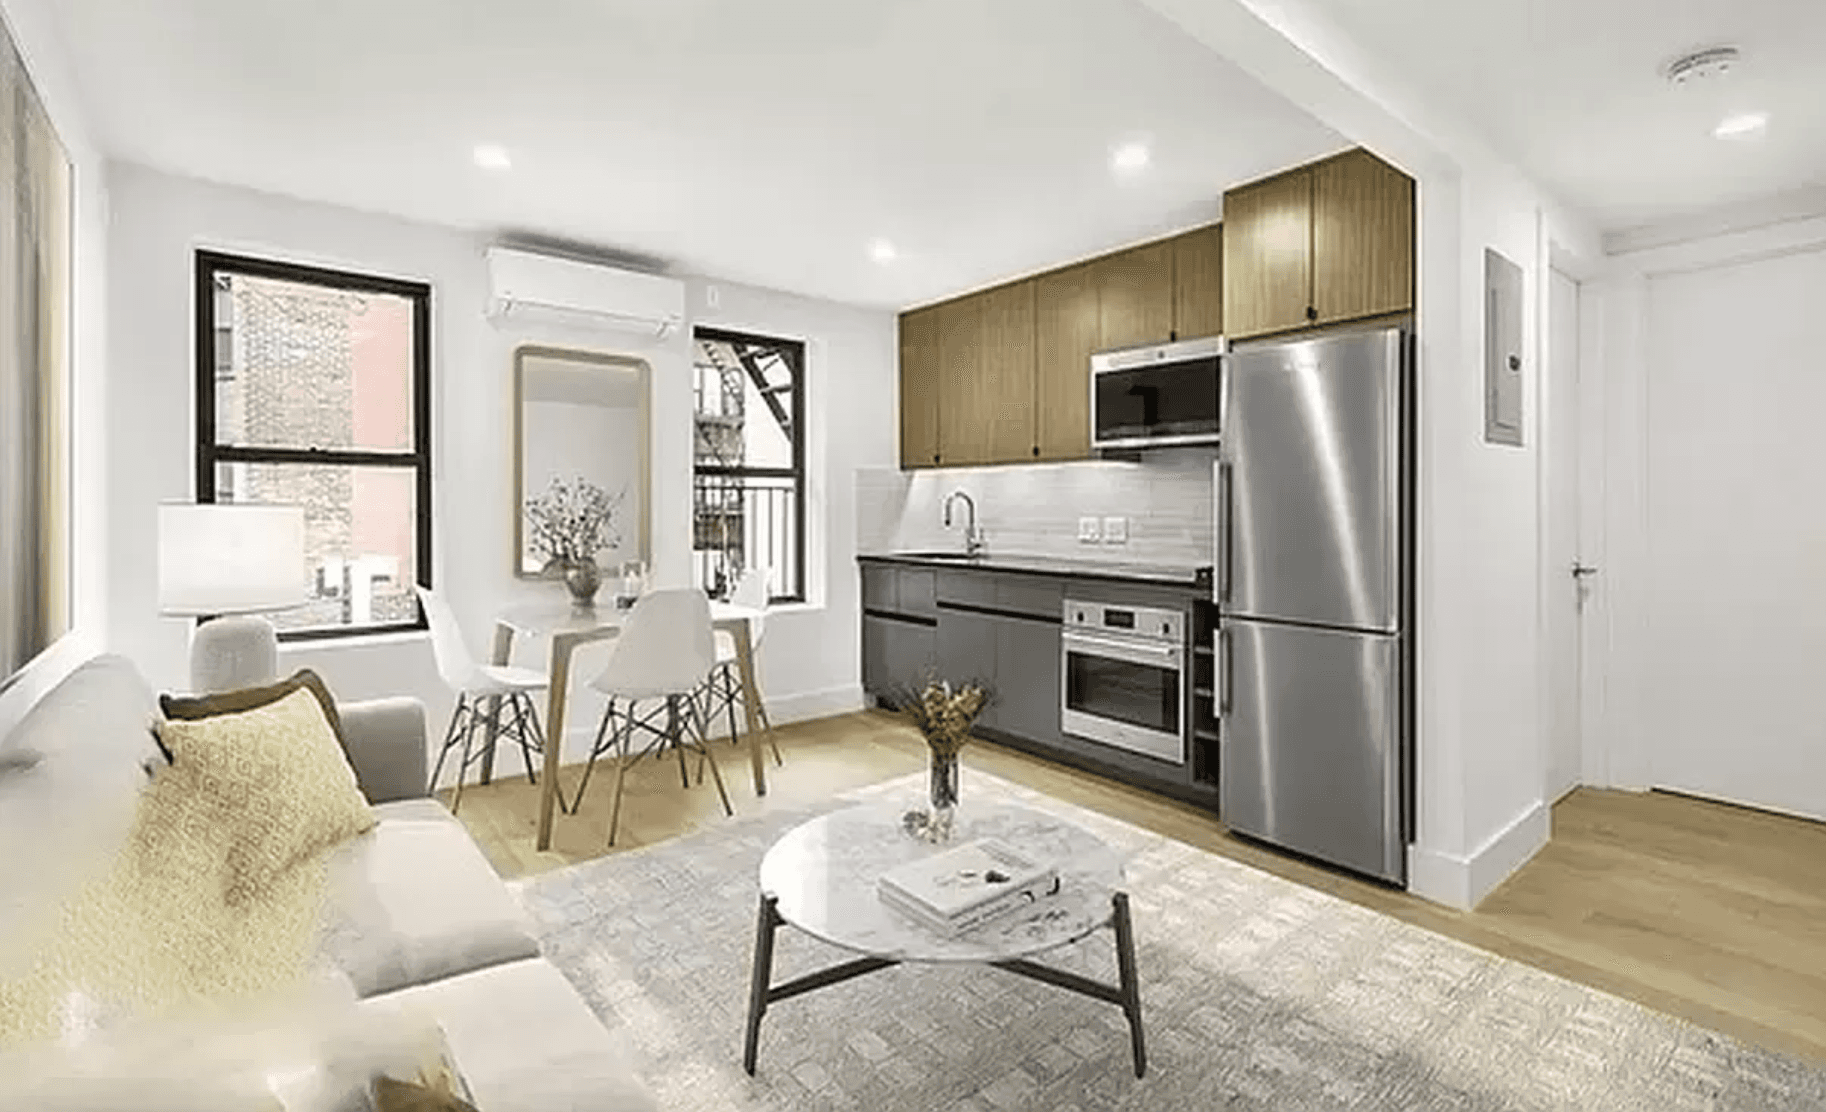 Beautifully renovated 2 Bedroom, 1 Bath with European white oak hardwood floors, Caesarstone countertops, stainless steel appliances, in unit W D, Sonos smart speakers with built in Alexa, Latch smart ...